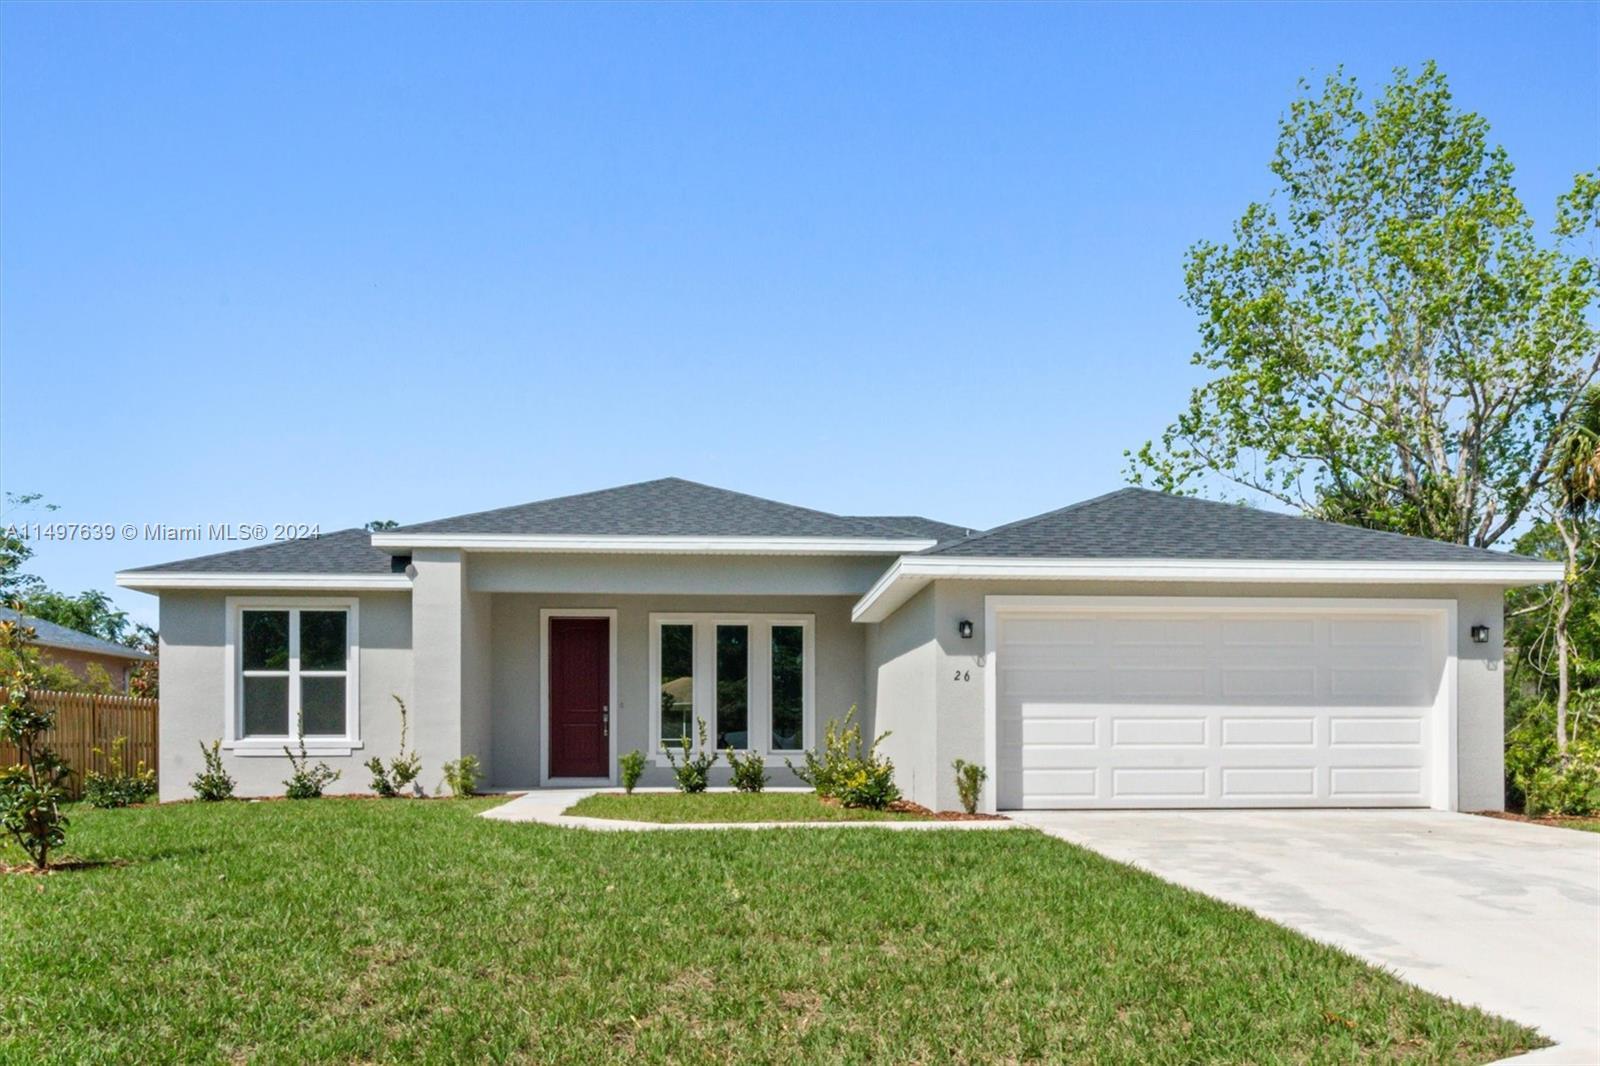 Photo of 26 White Hall Dr in Palm Coast, FL